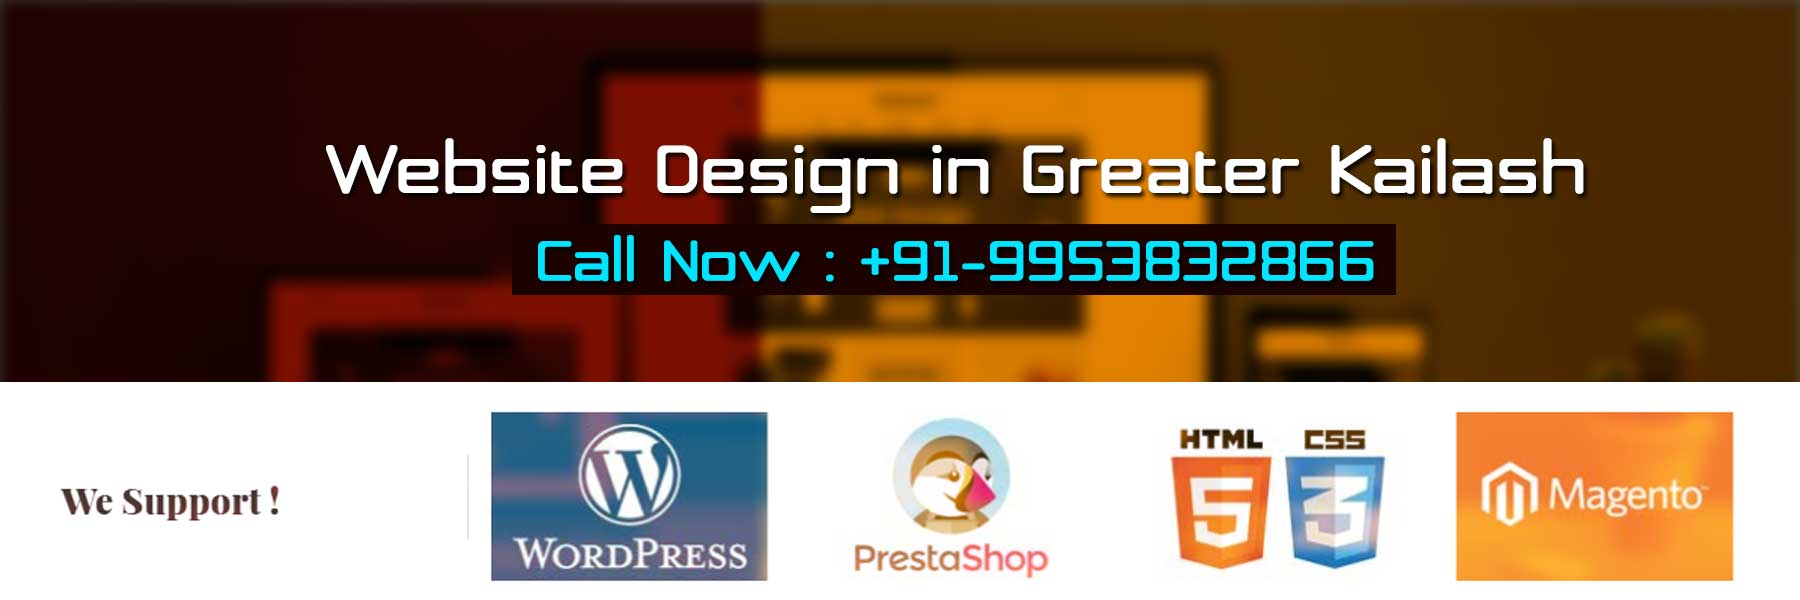 Website Design in Greater Kailash